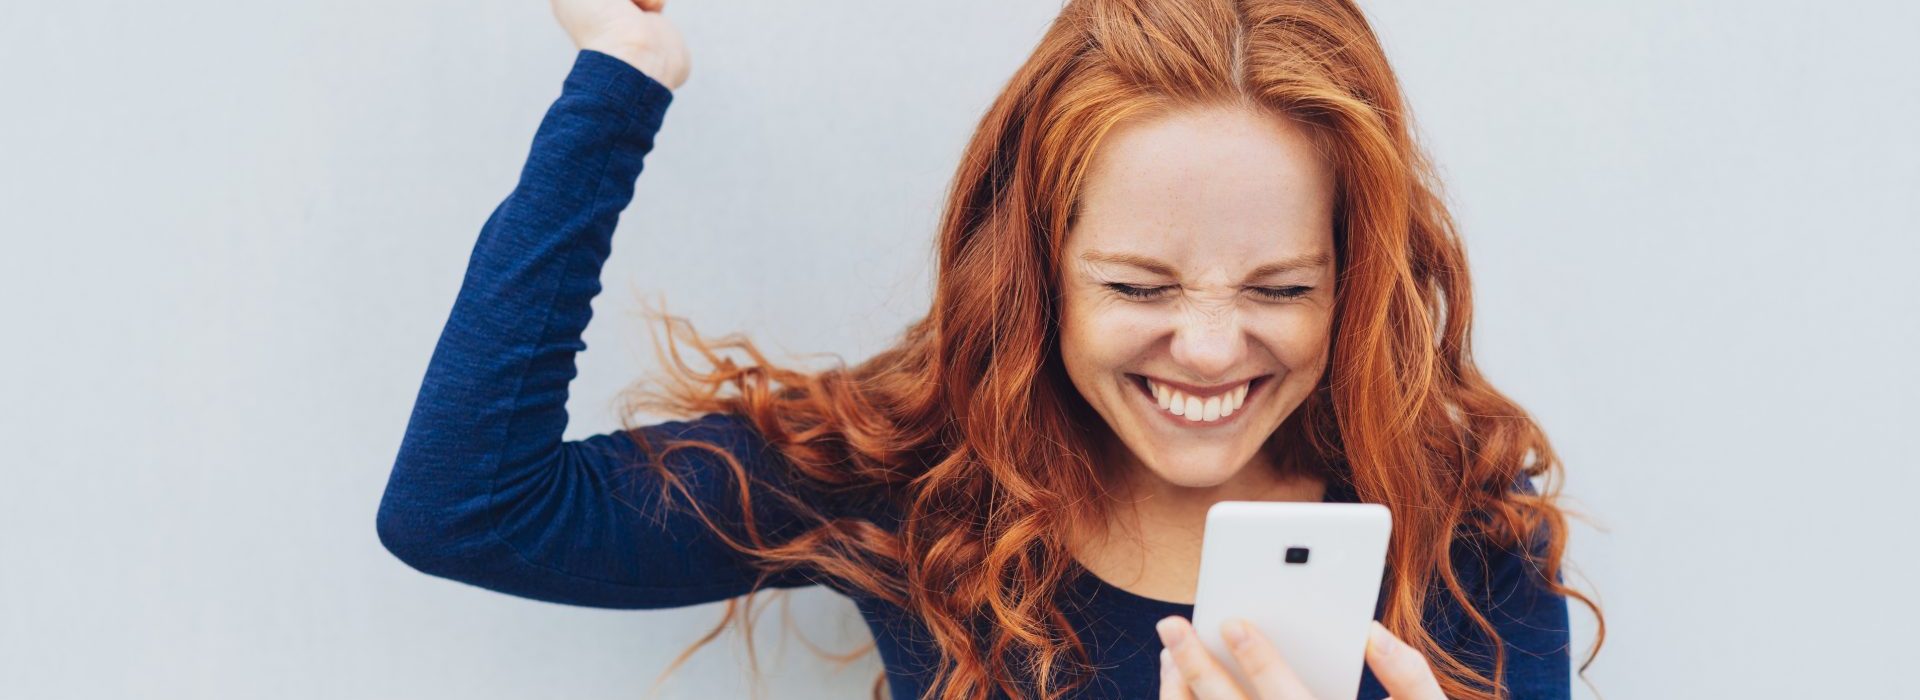 Young redhead celebrating a terrific home and car insurance quote on her mobile phone.